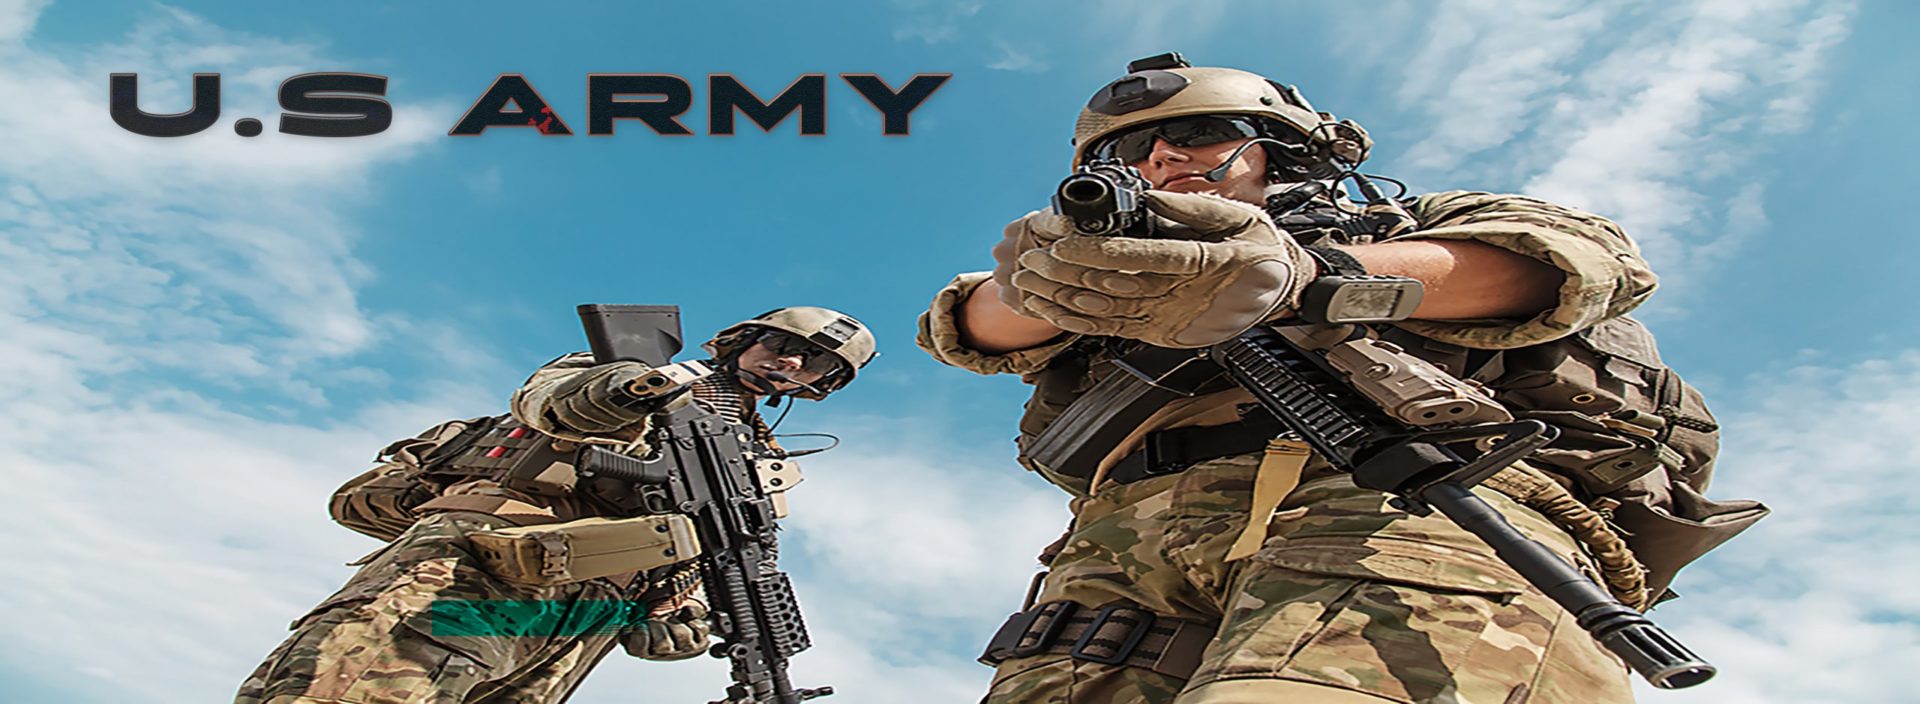 The U.S Army and it's 'Special Forces' 1